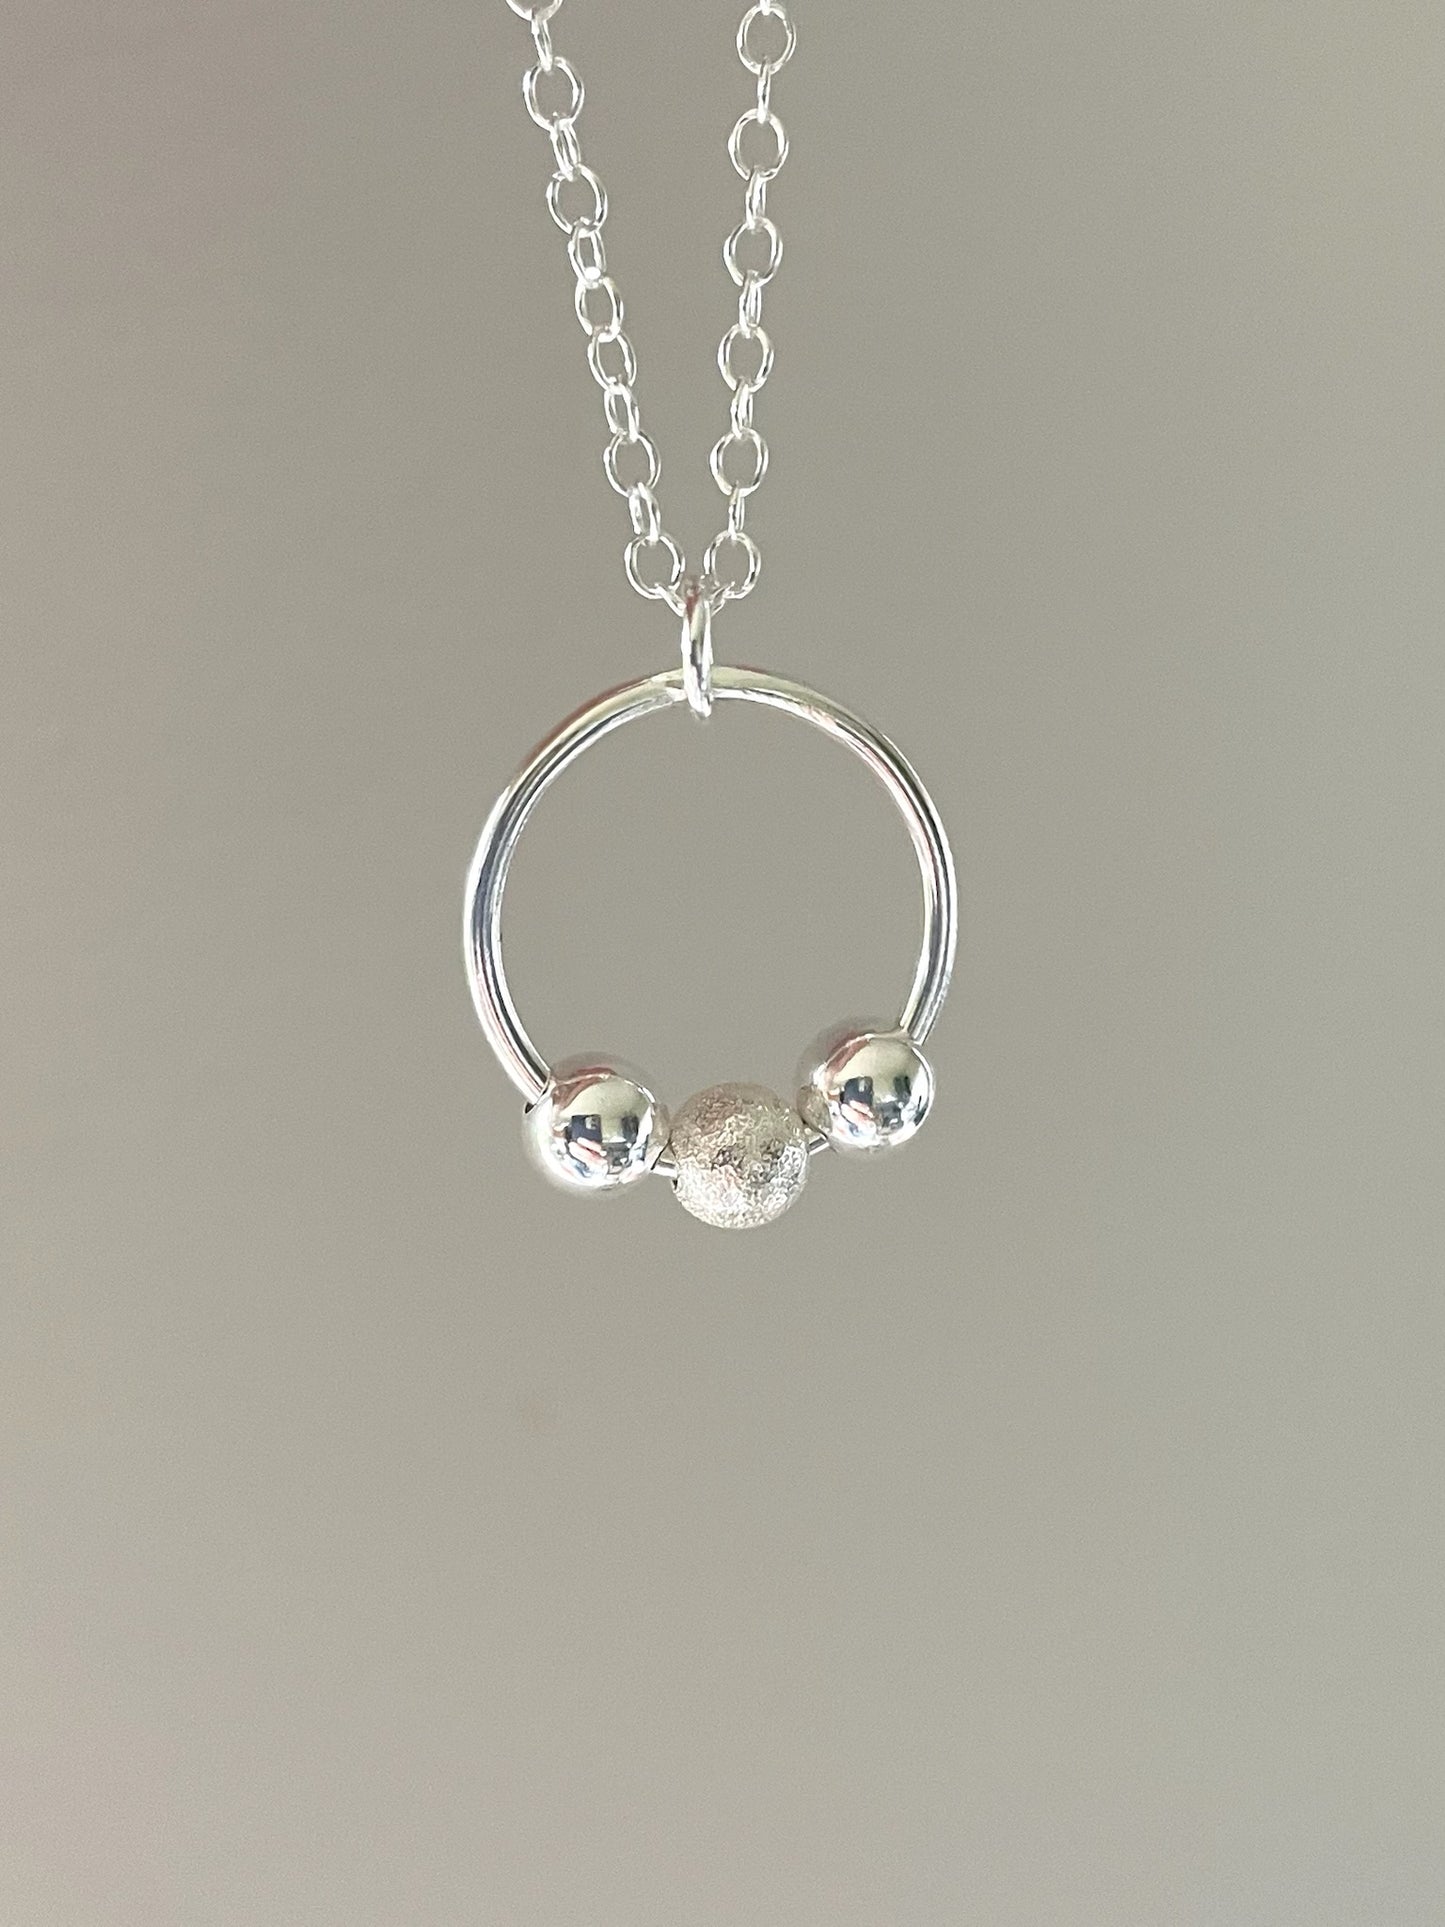 Sterling silver fidget necklace, silver bead necklace